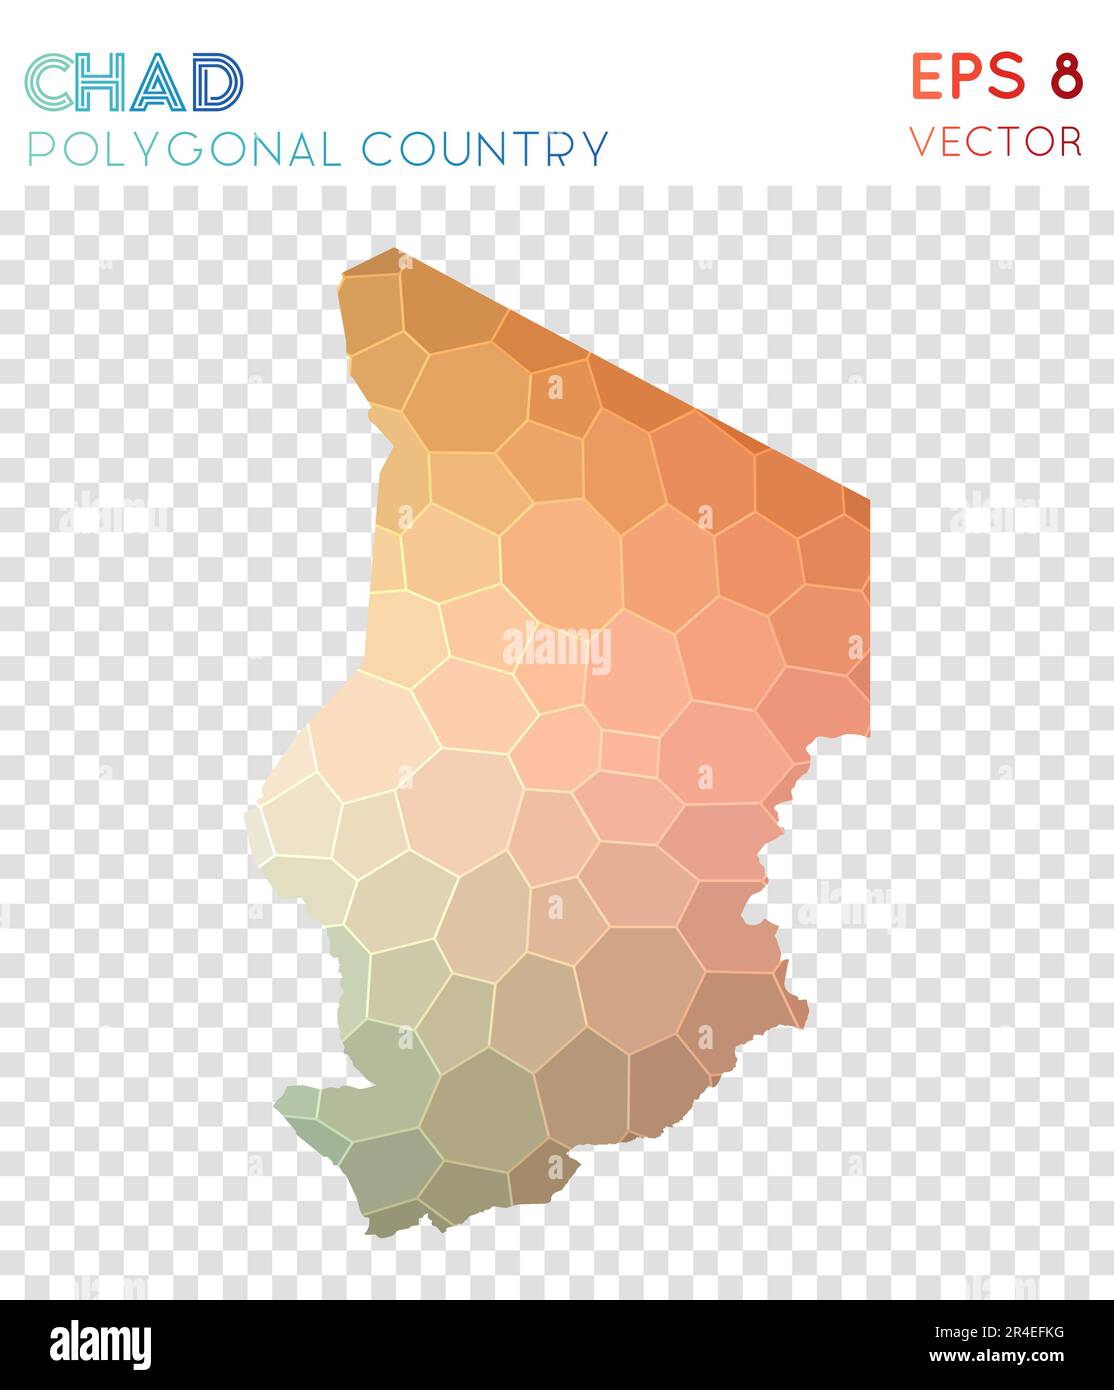 Chad polygonal map, mosaic style country. Delicate low poly style, modern design. Chad polygonal map for infographics or presentation. Stock Vector